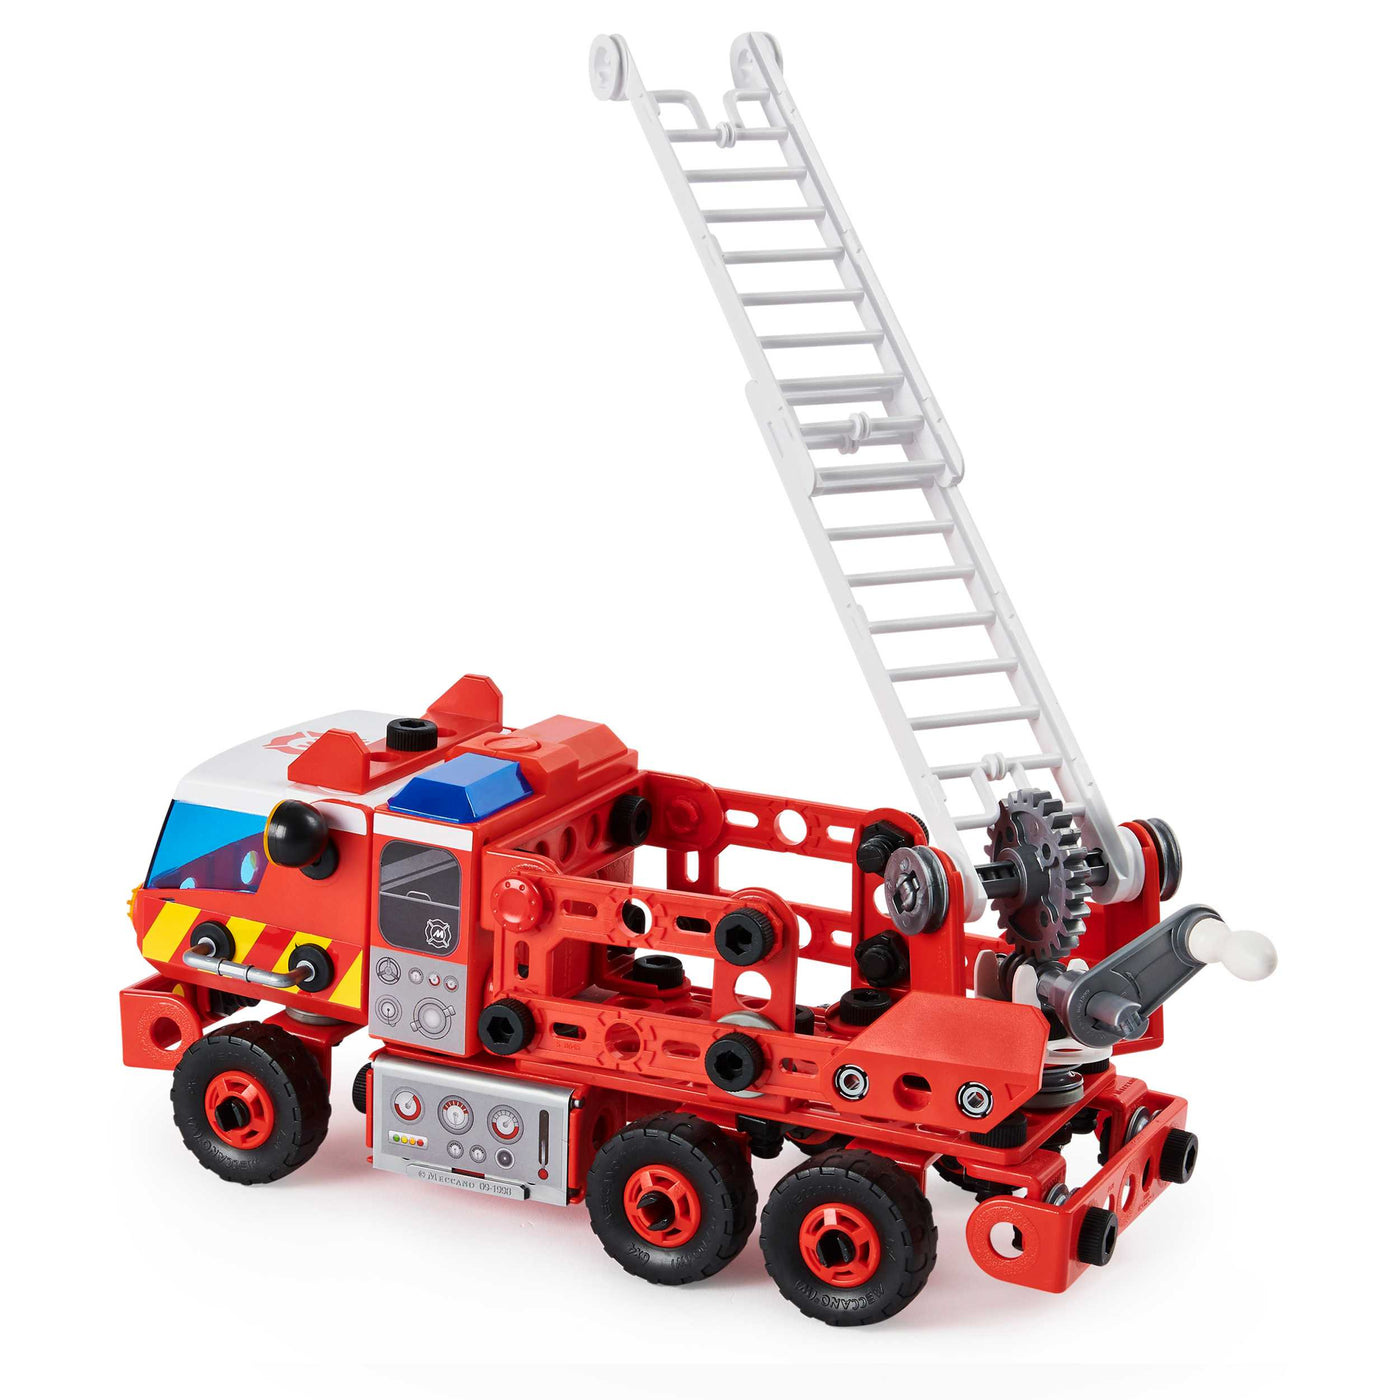 Rescue Fire Truck with Lights and Sounds